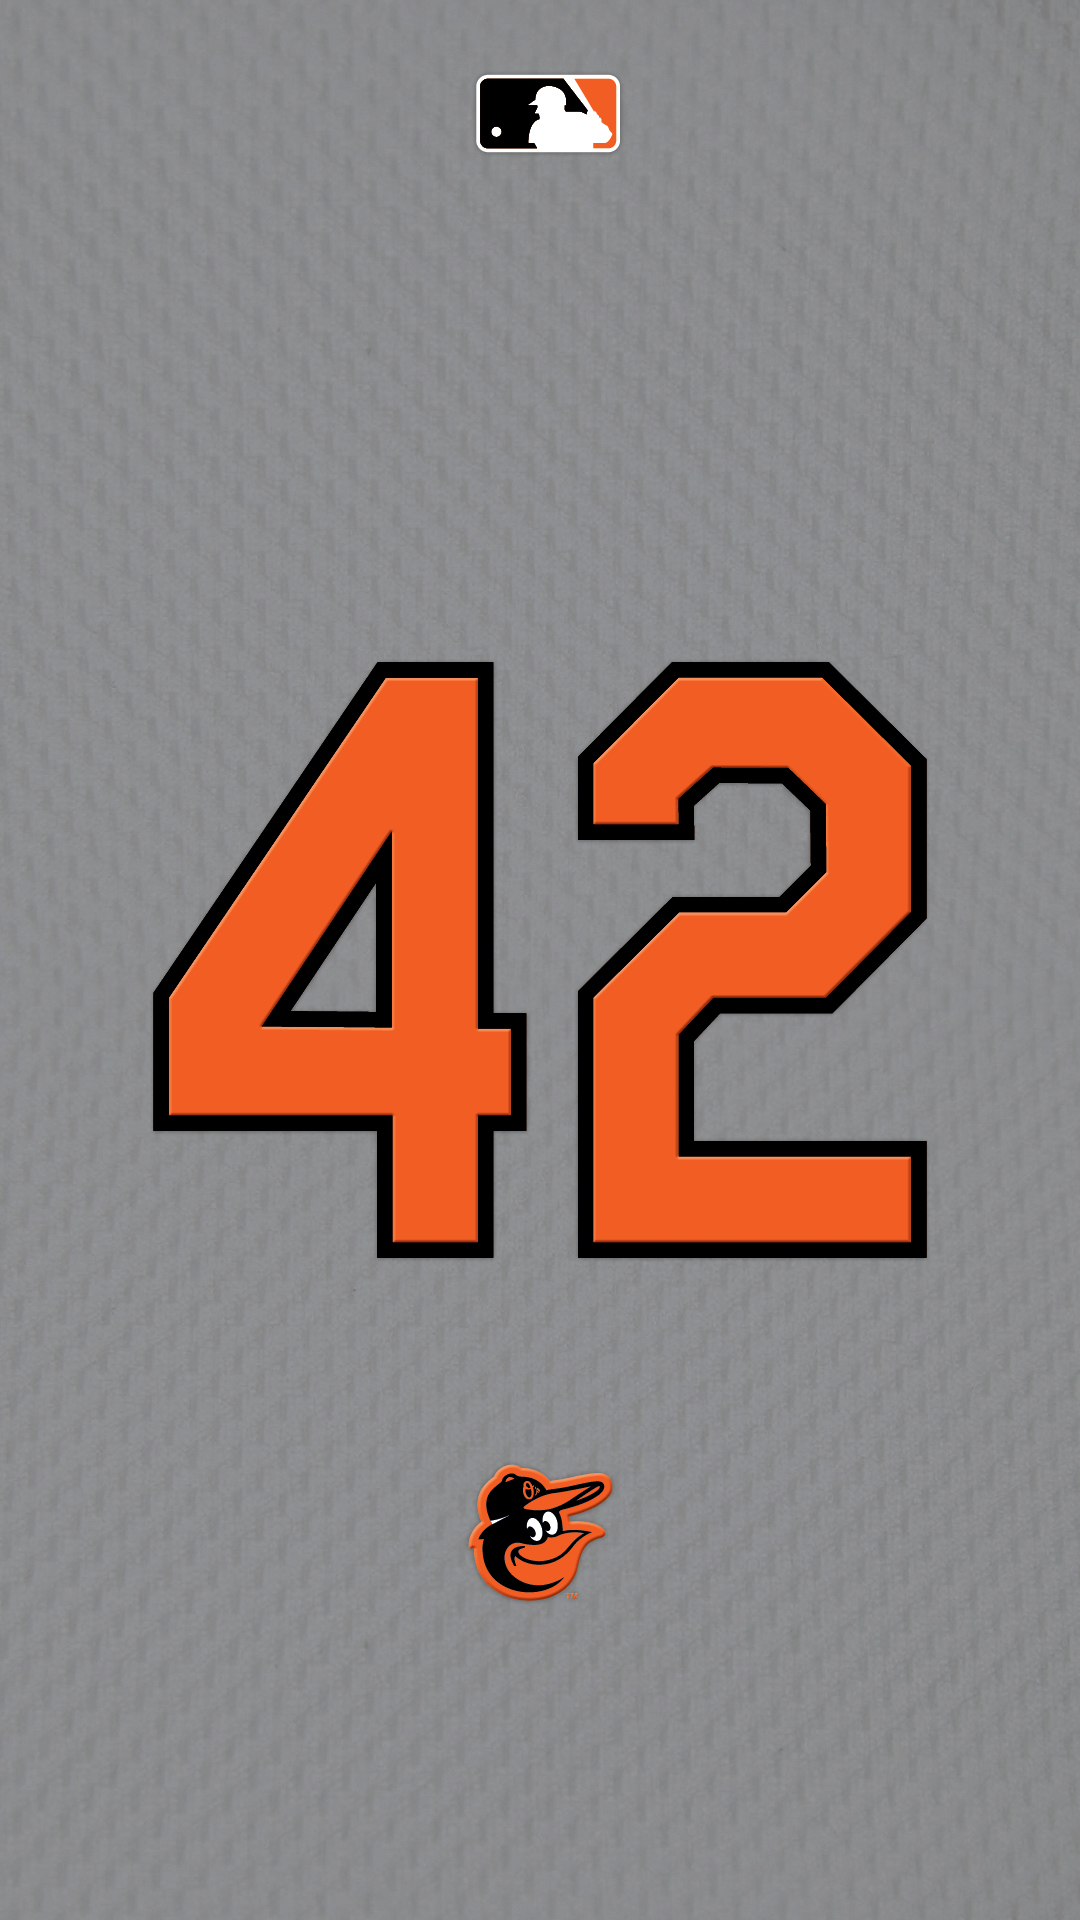 Baltimore Orioles Twitter पर A new month calls for new phone wallpaper   Try out this one of Manny Machado sporting the Friday black Birdland  httpstcotJ4CYE3mLz  X